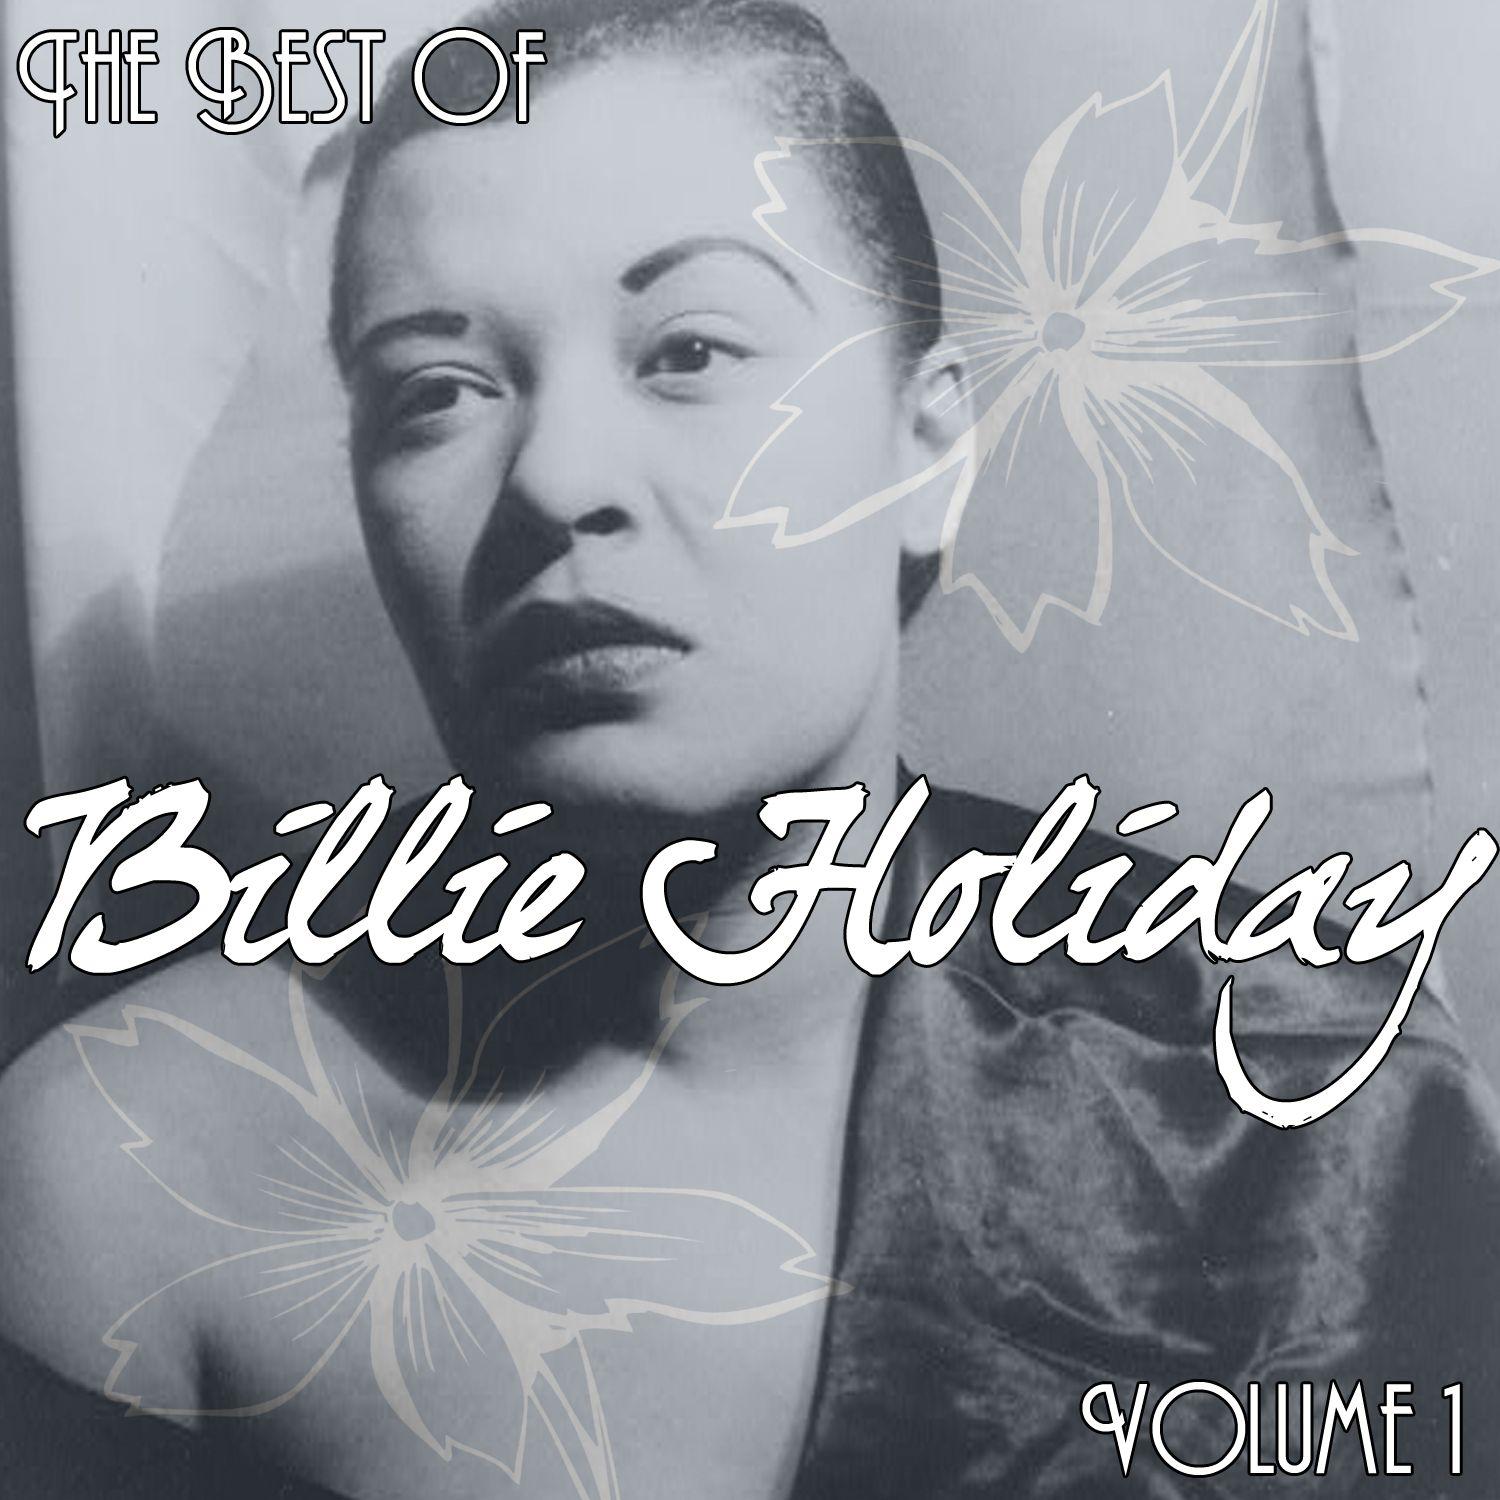 The Best Of Billie Holiday Volume 1